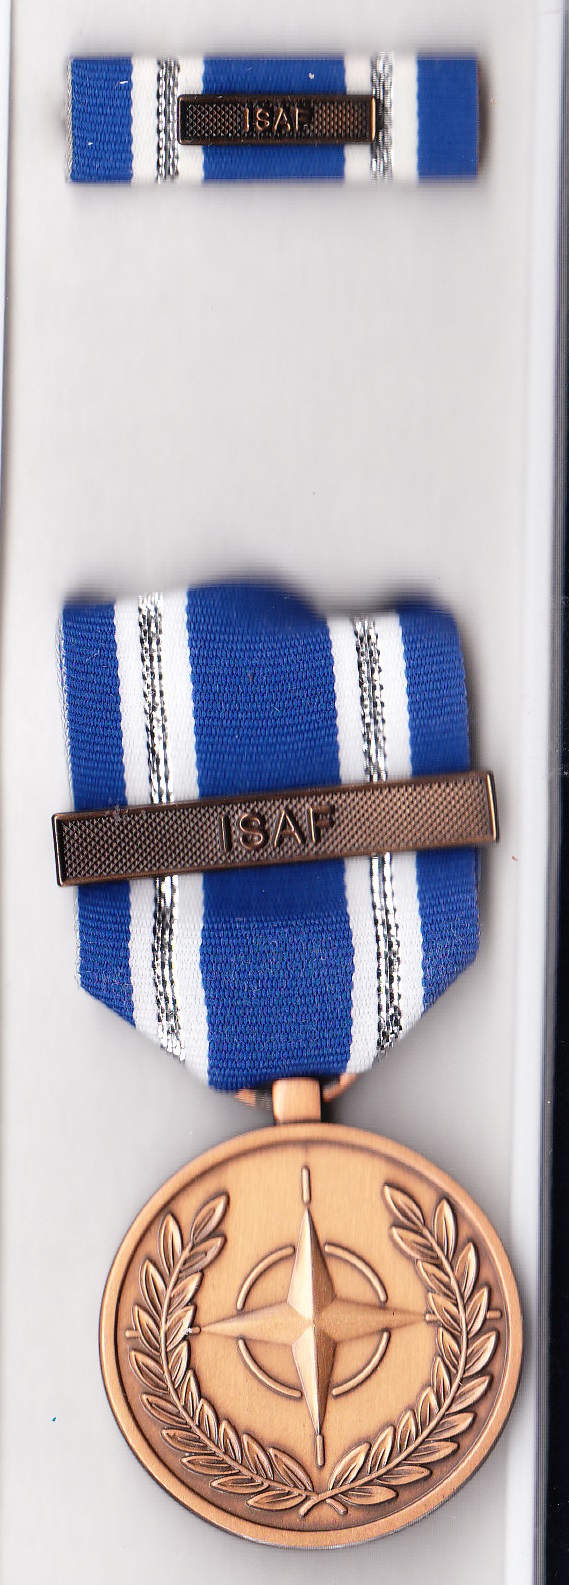 Nato ISAF Medals as issued to forces who assisted in the NATO humanitarian effort in areas of